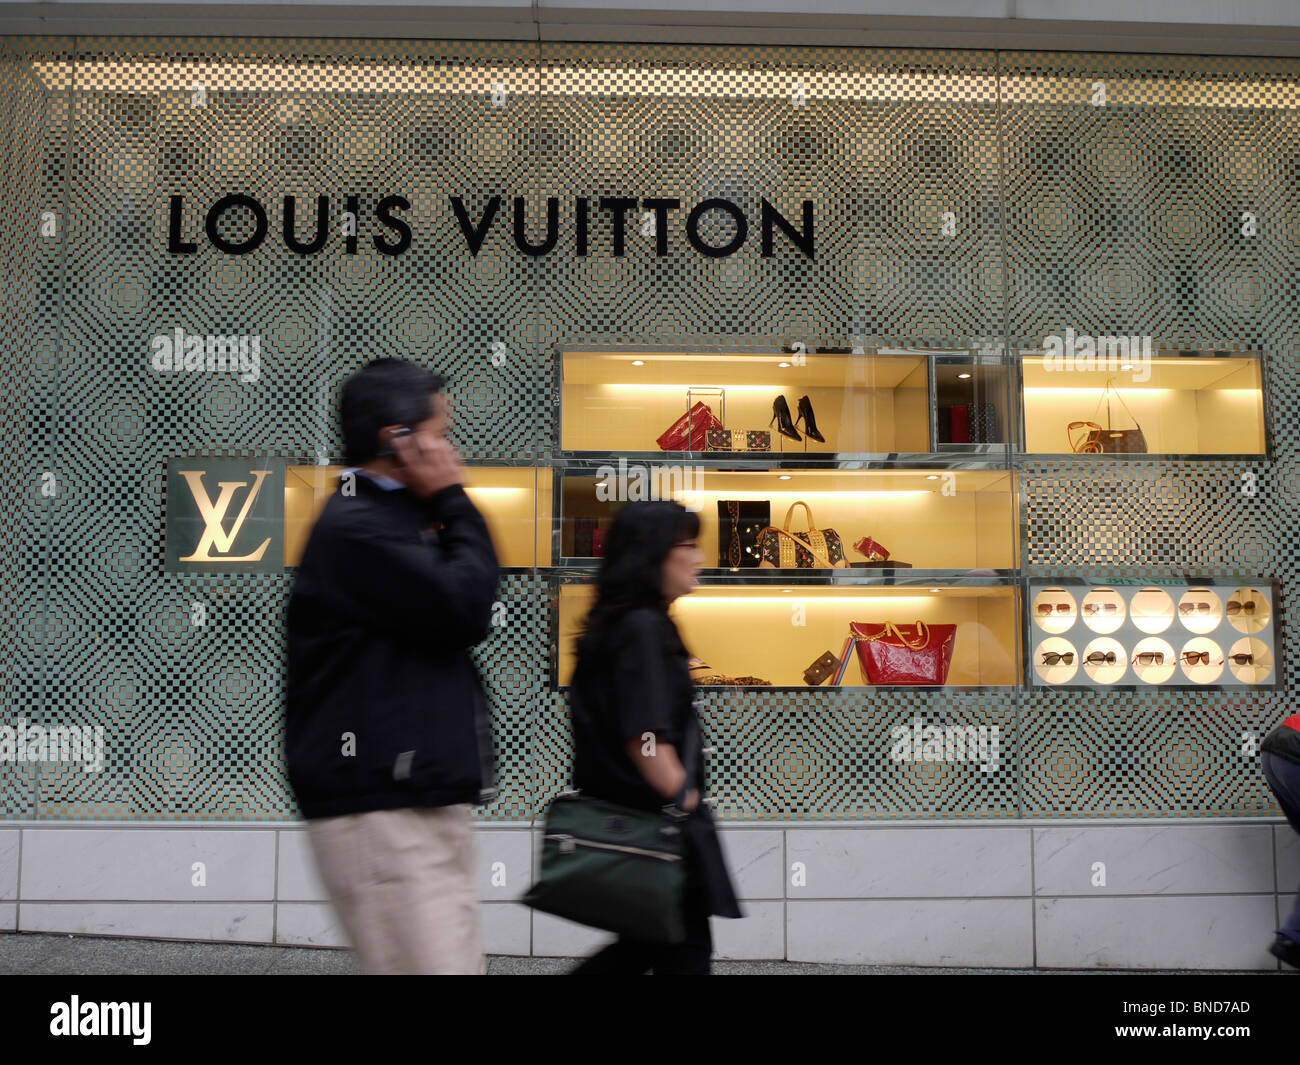 Does Louis Vuitton Have Outlet Stores